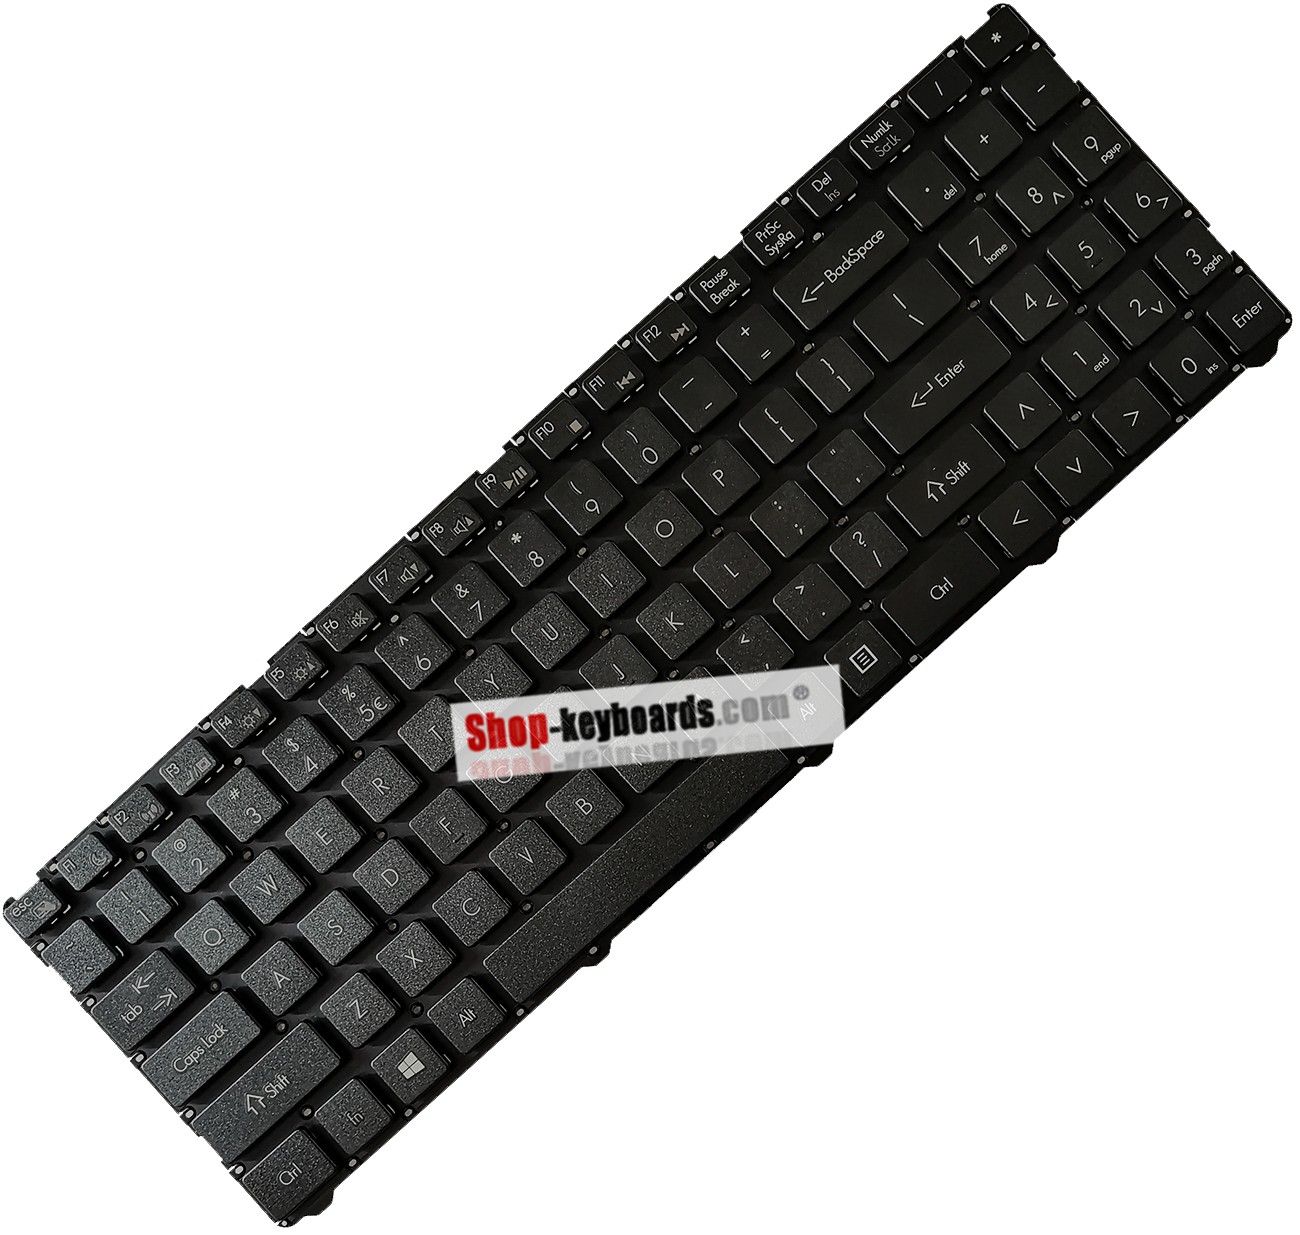 LG MP-12K73F0-9207 Keyboard replacement